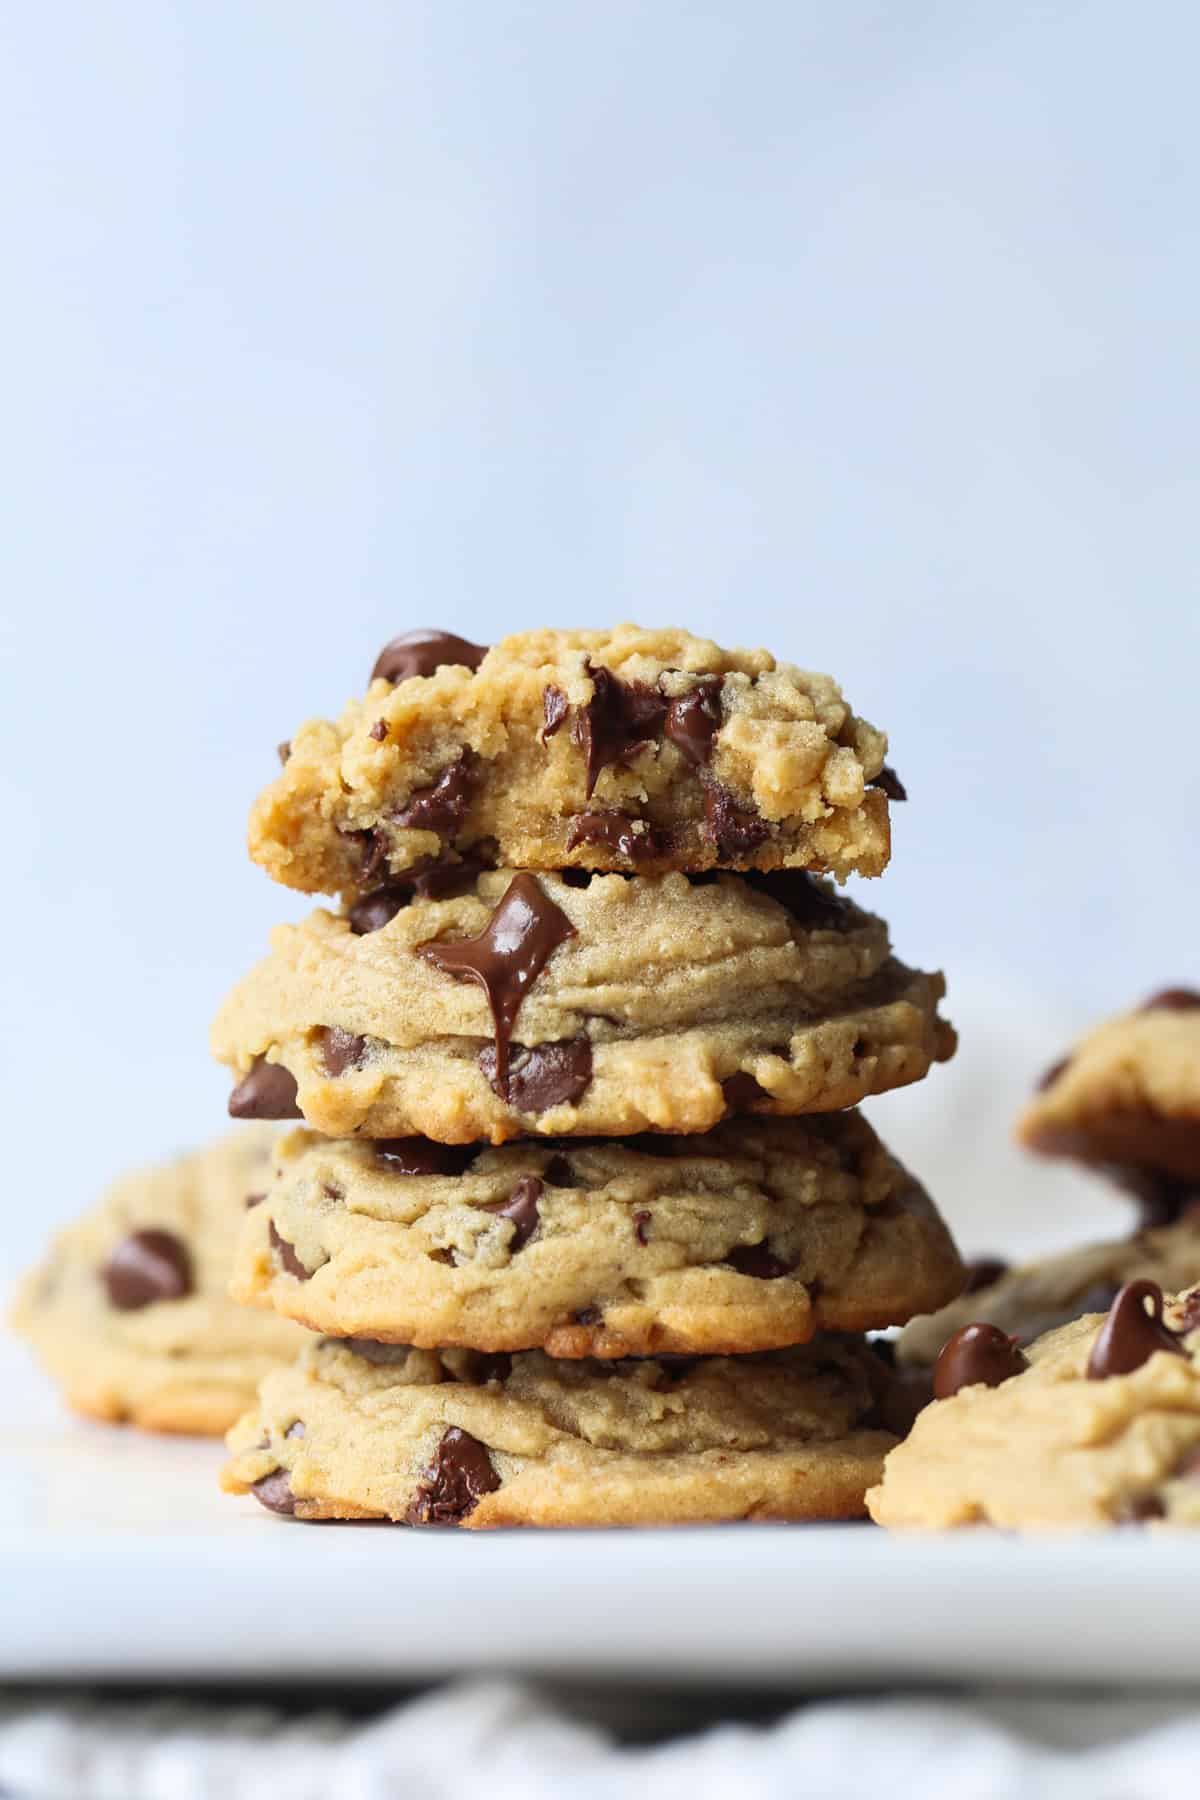 Four thick peanut butter cookies with chocolate chips stacked on a white ceramic plate.